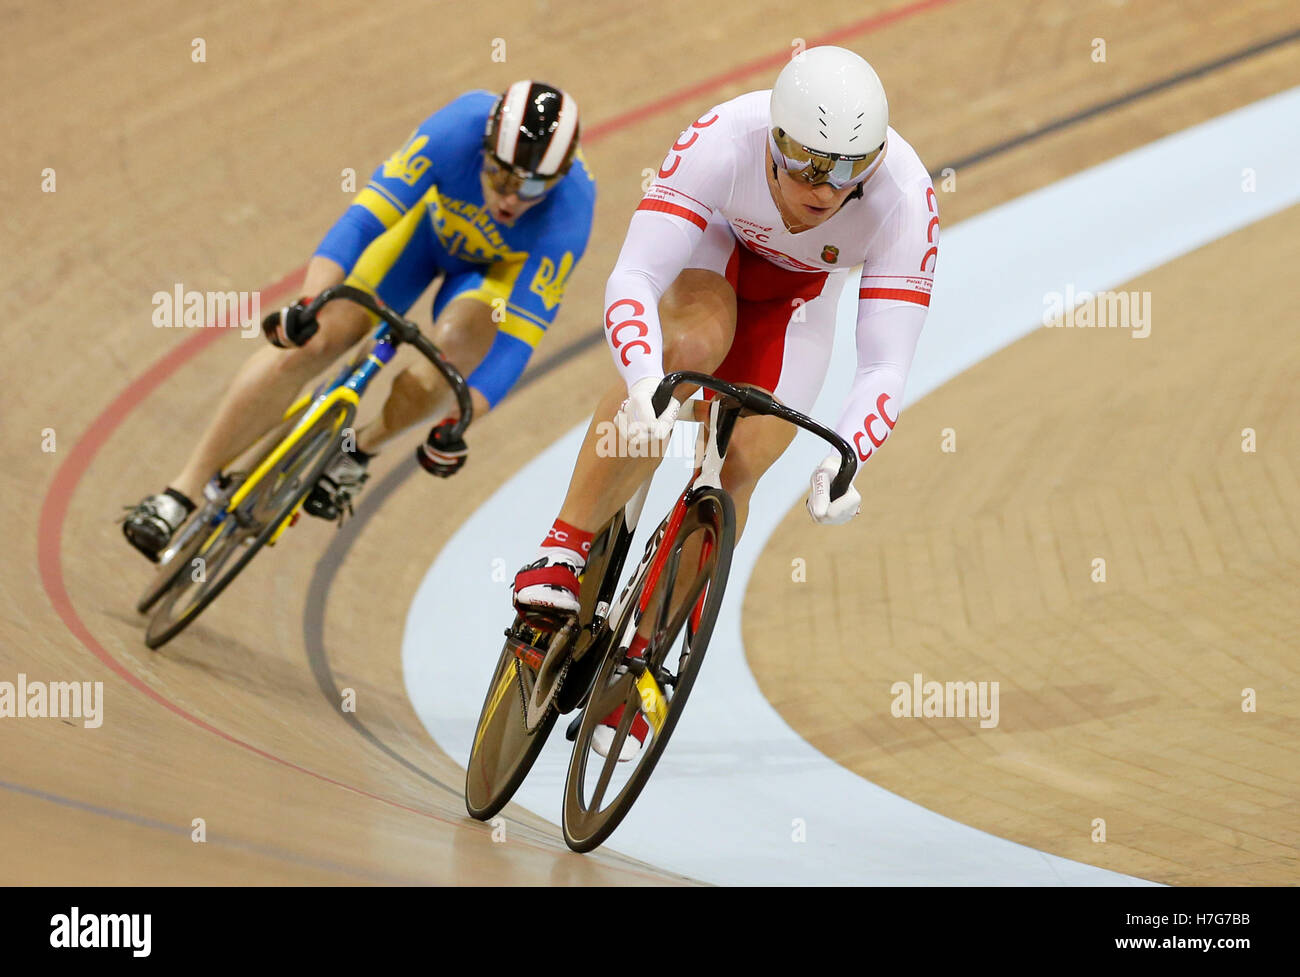 Poland's Kamil Kuczynski (right) rides against Ukraine's Andrii Vynokurov in the Men's Sprint Semi-Finals during day one of the UCI Track Cycling World Cup at the Sir Chris Hoy Velodrome, Glasgow. PRESS ASSOCIATION Photo. Picture date: Friday November 4, 2016. Photo credit should read: Jane Barlow/PA Wire. Stock Photo